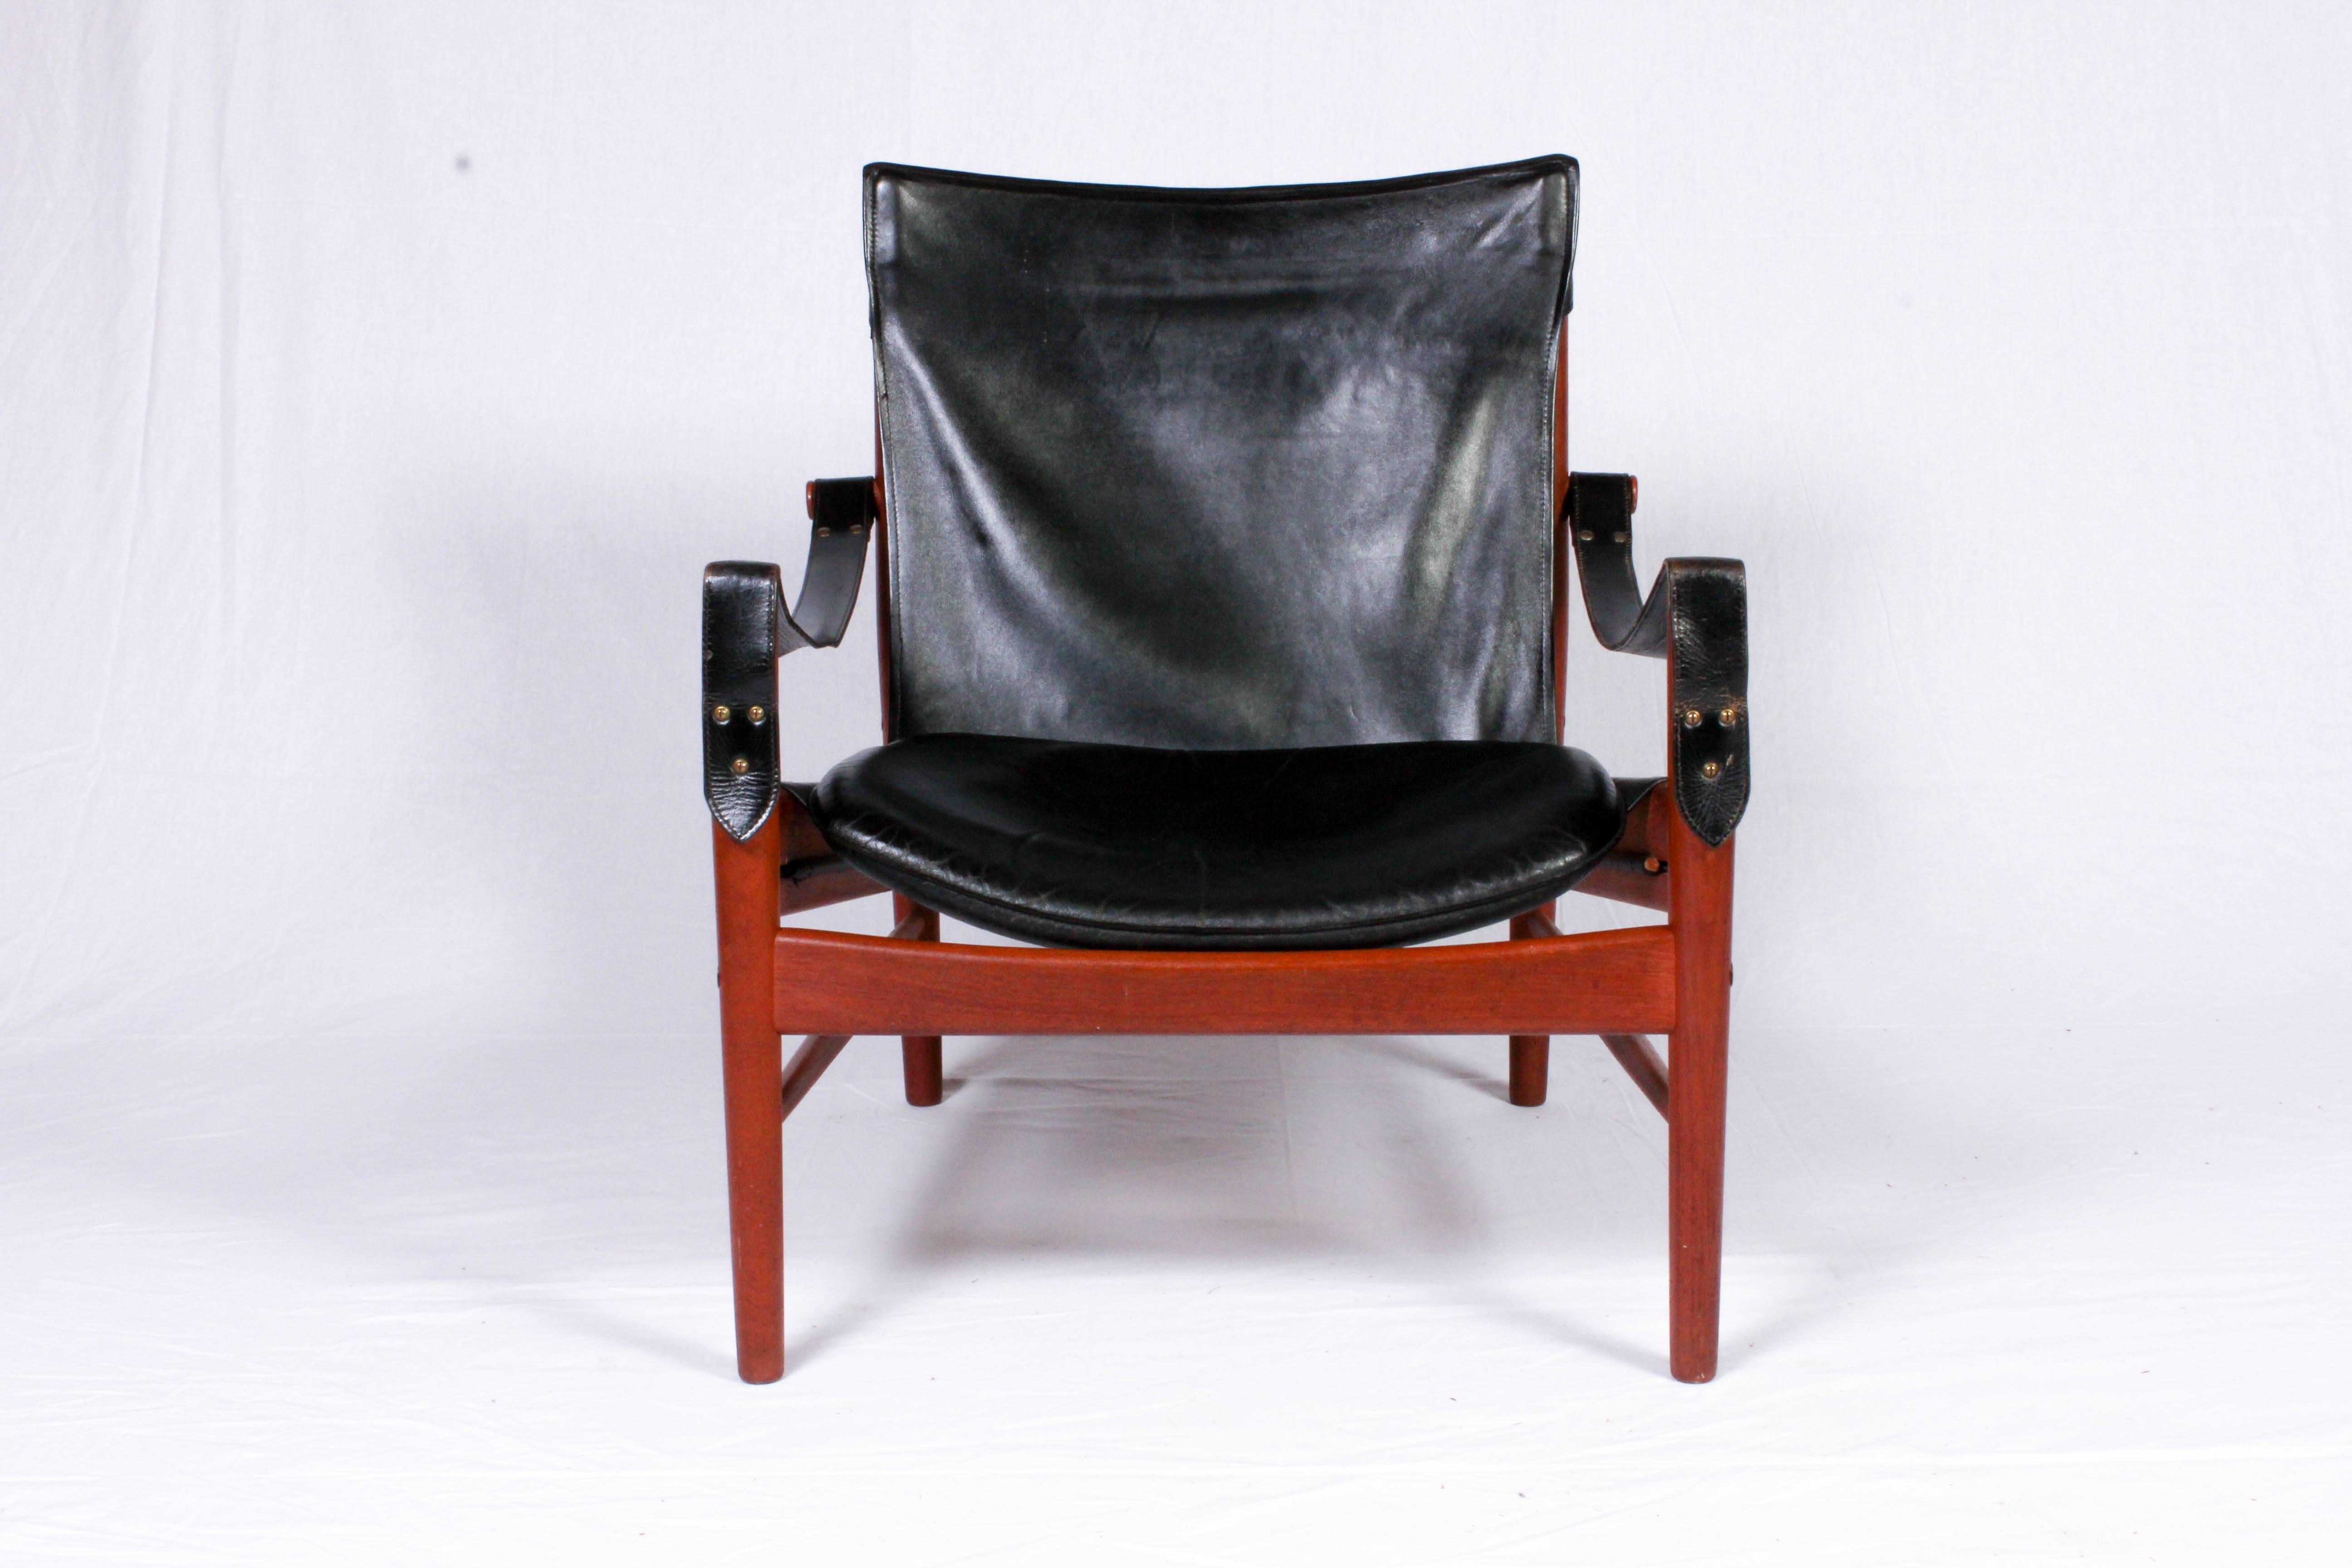 Very rare safari chair called Antilopen by Danish designer Hans Olsen for Viskadalens Möbler, Sweden. The chair is made out of a teak frame with original black leather upholstery. This chair is one of the most decorative safari chairs ever made and